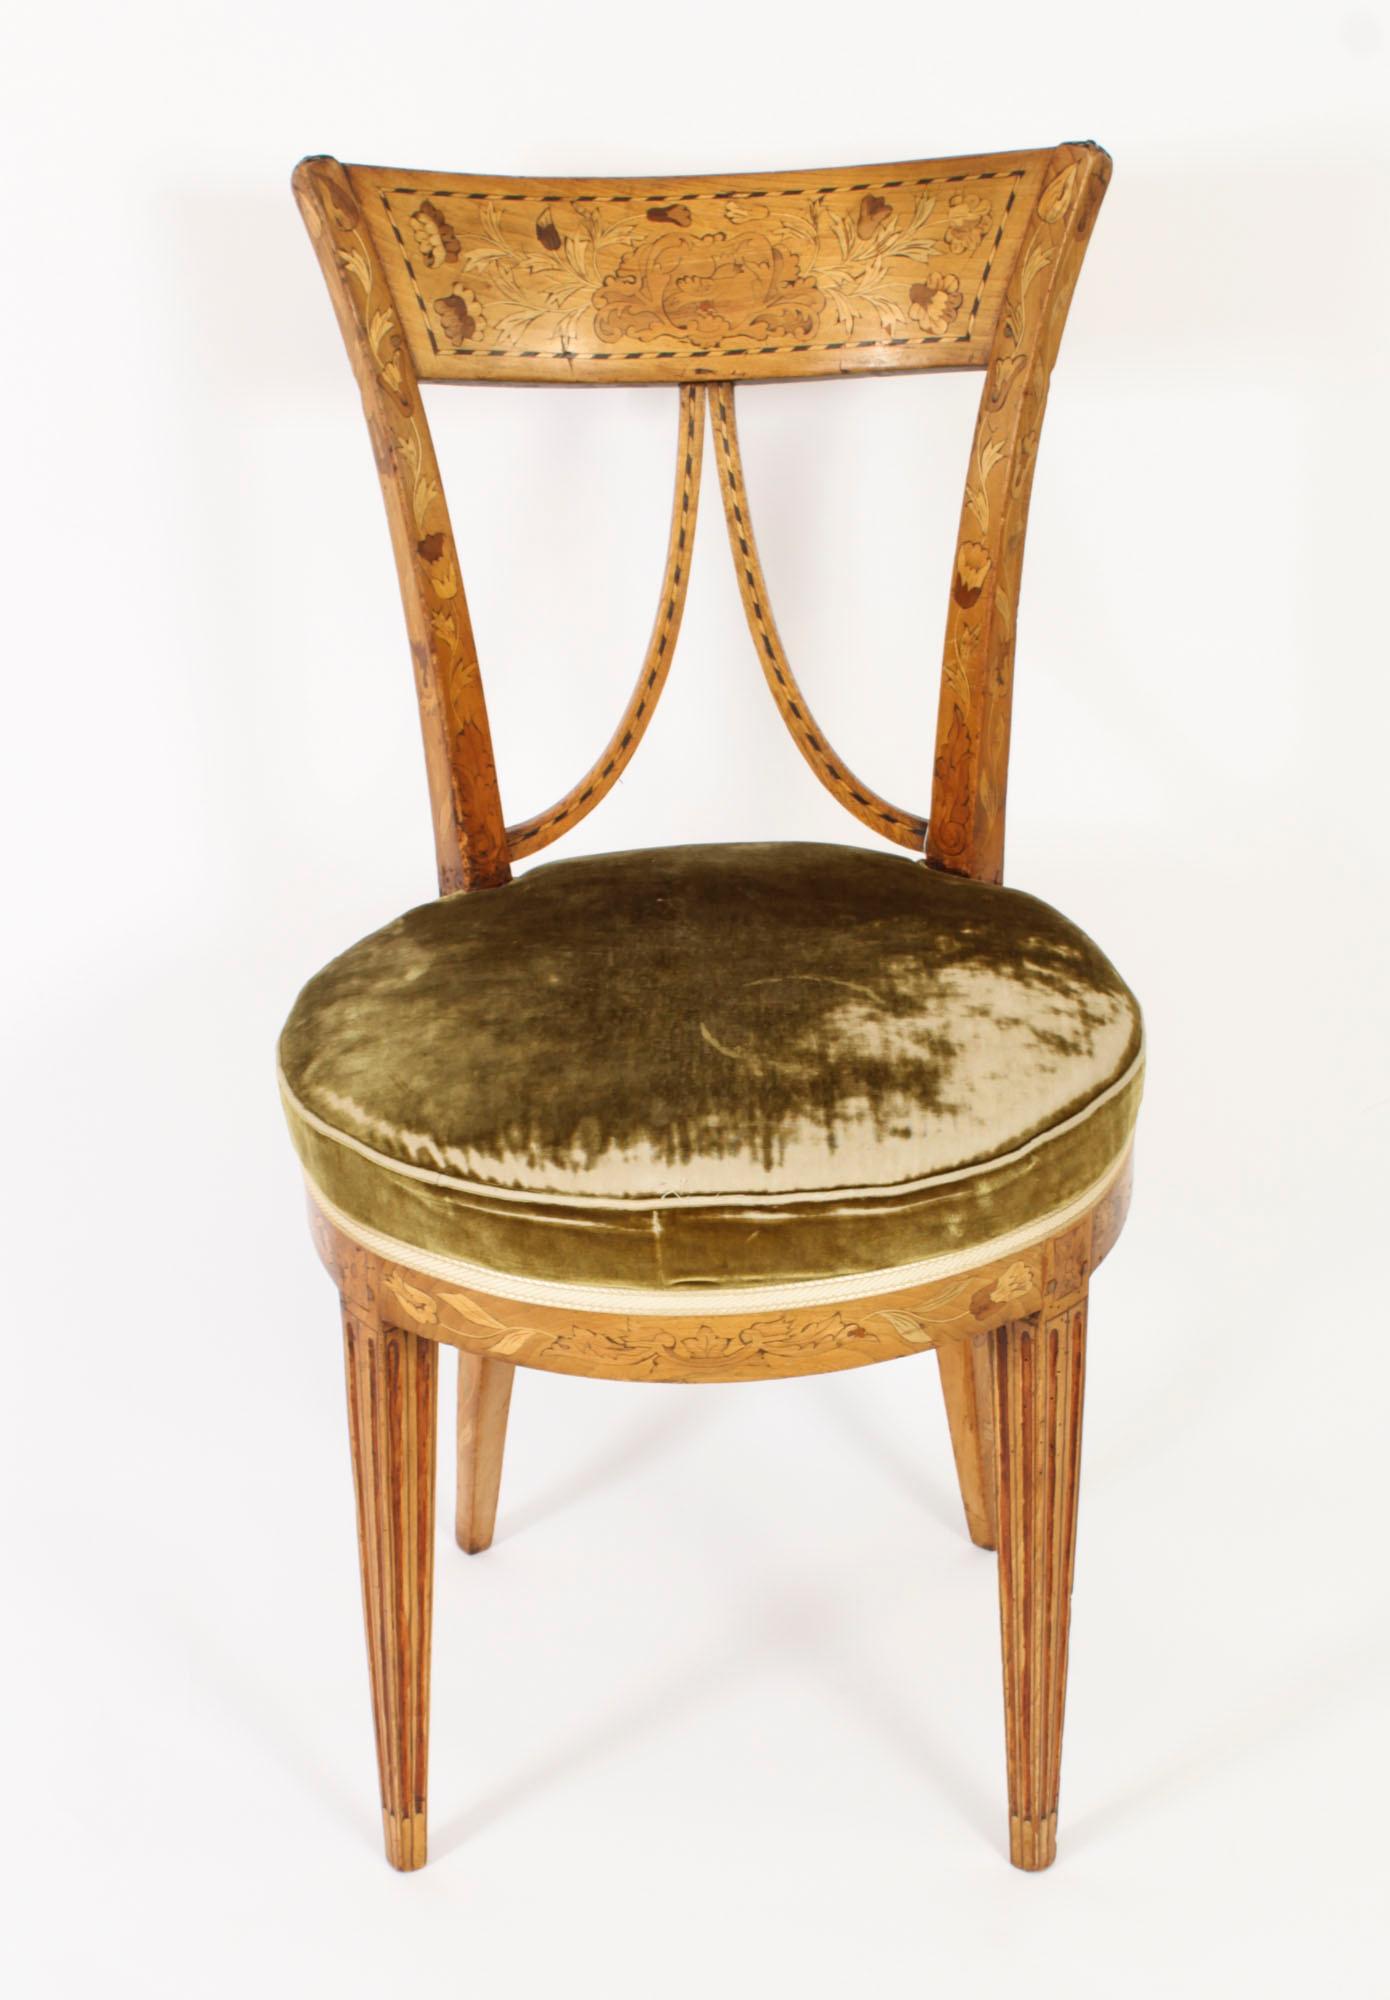 This is a lovely antique Dutch V back satinwood and marquetry chair, circa 1830 in date.

The stunning chair features  sumptuous floral marquetry with ebonised line inlaid decoration.

The over stuffed seat has been upholstered in a green fabric.
